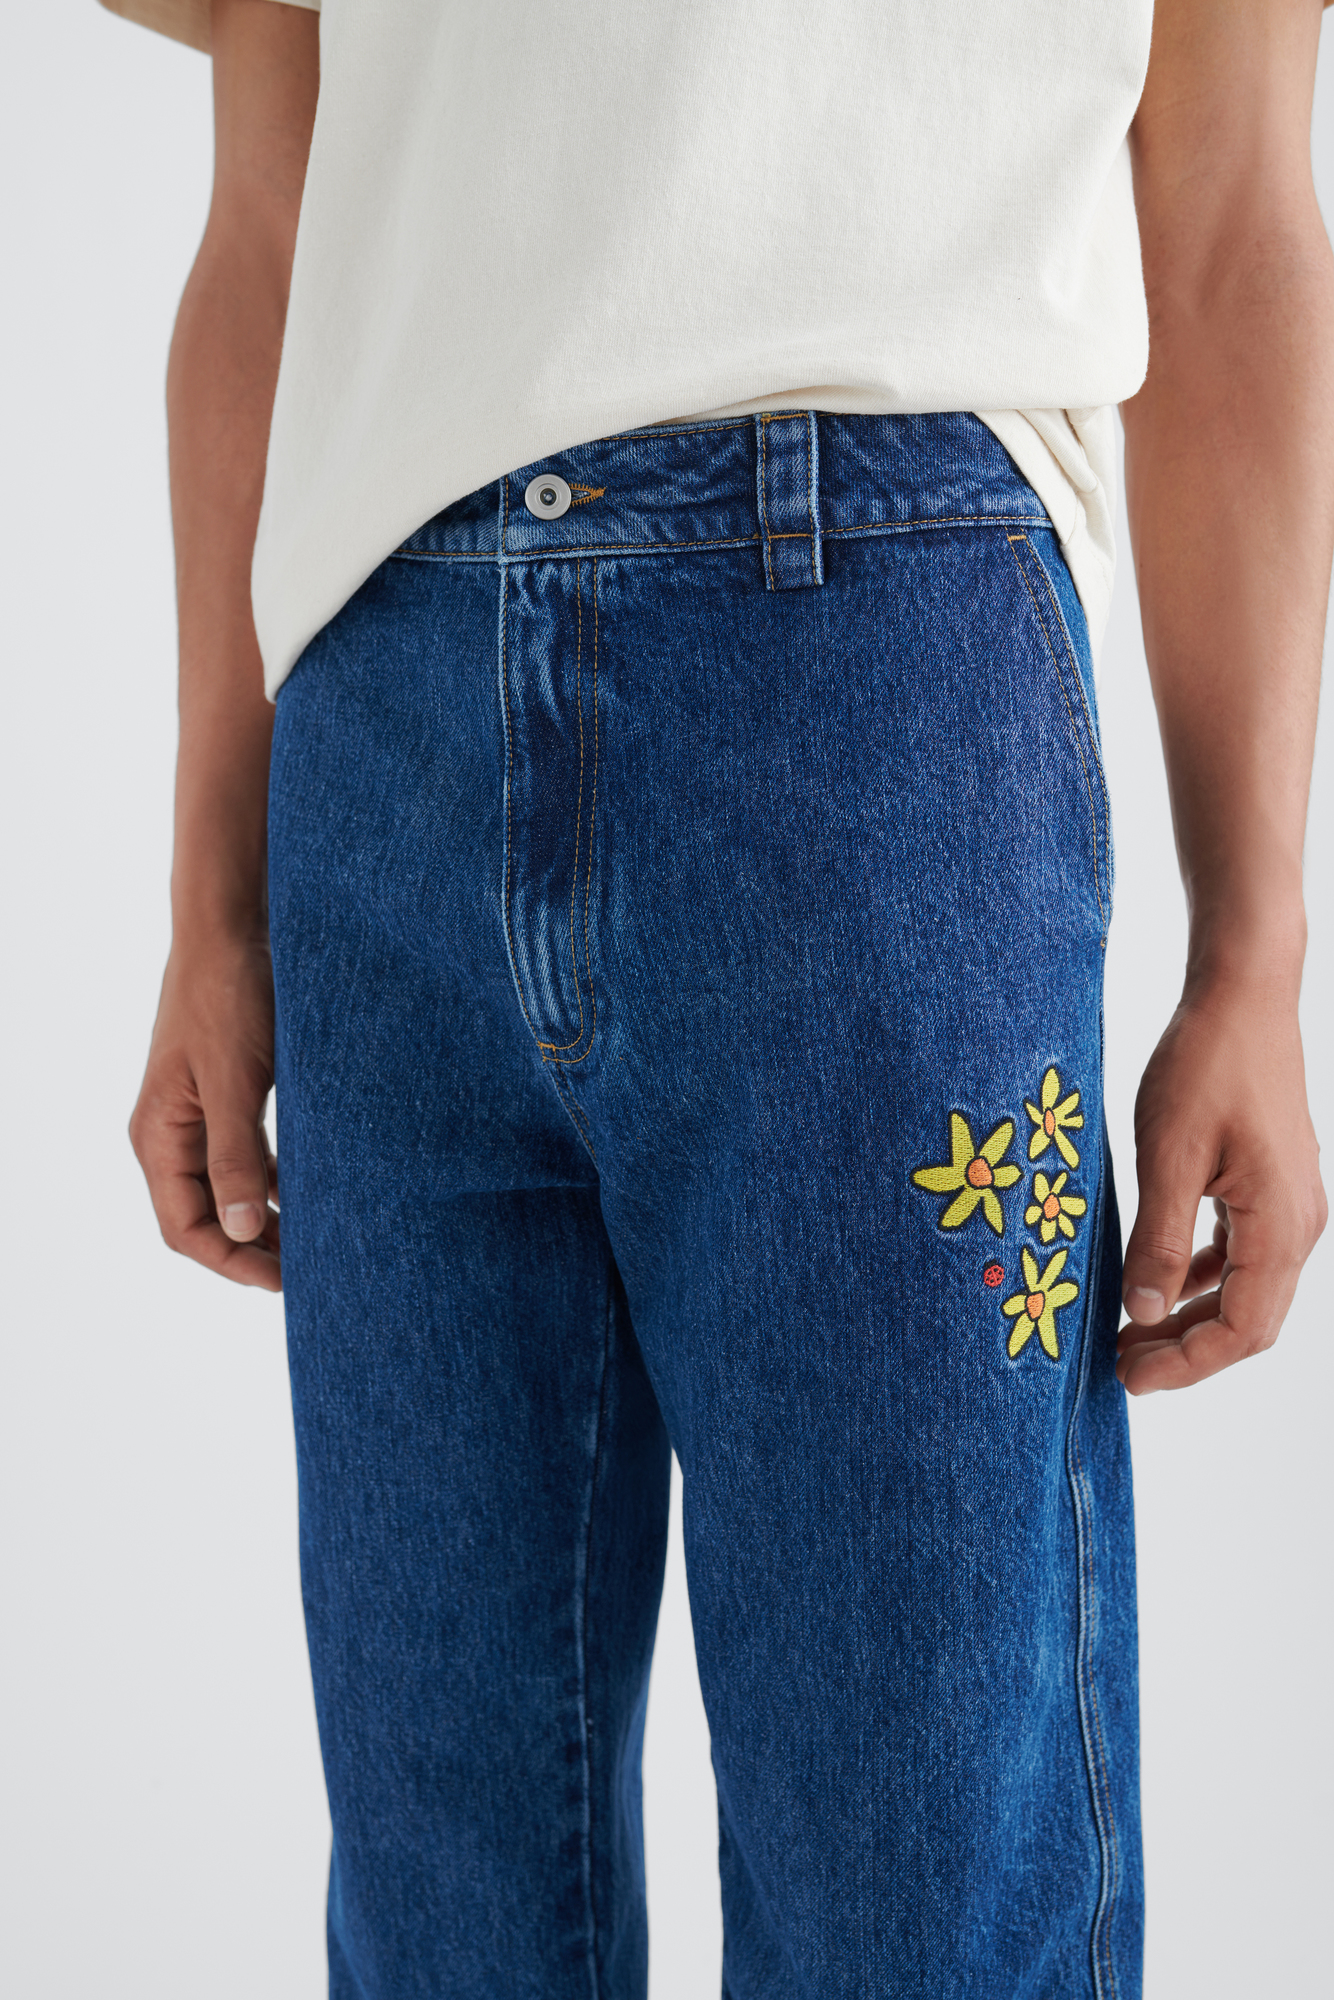 West Floral-Embroidered Jeans